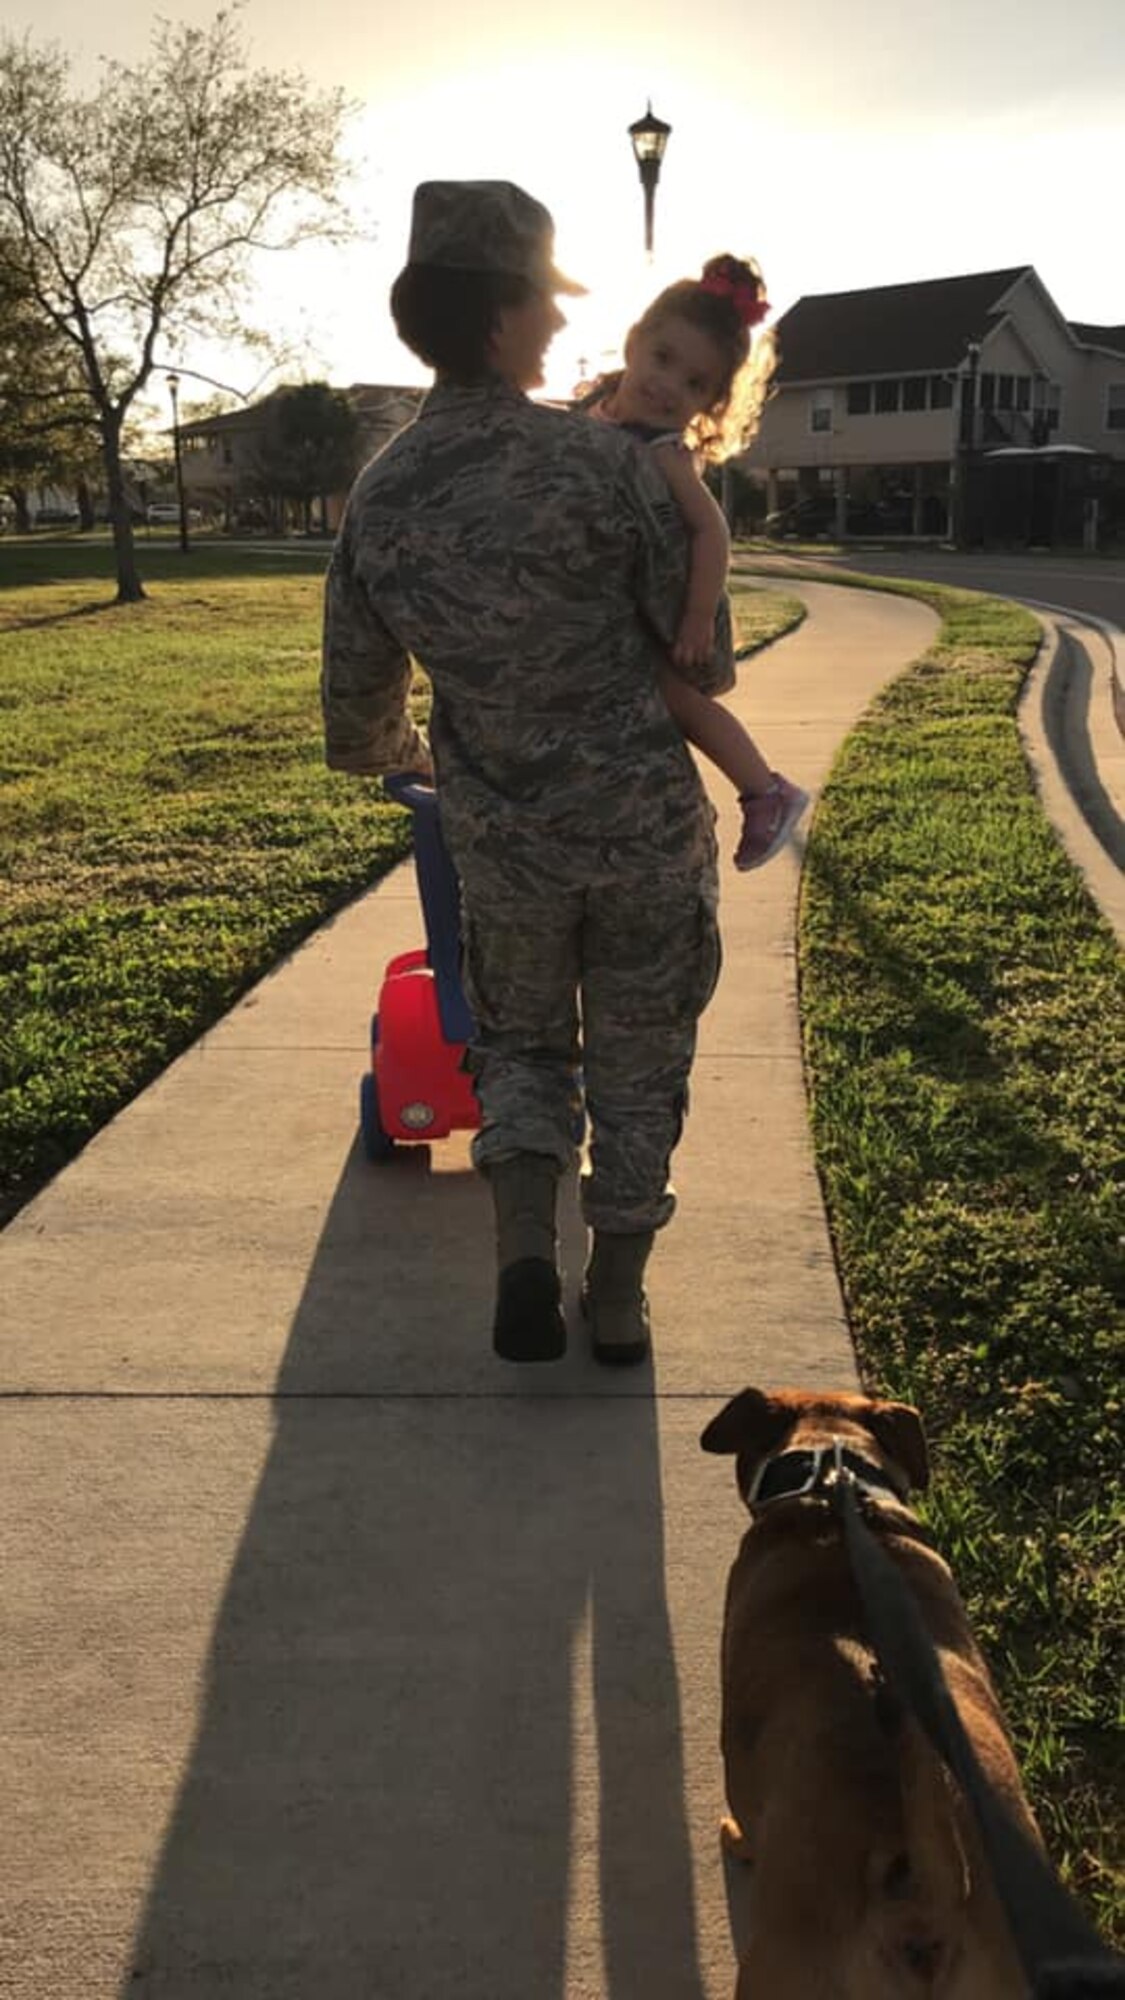 U.S Air Force Airman Staff Sergeant Heather Fejerang holds her daughter Isabel Fejerang while walking home at MacDill Air Force Base, Fla., February 2019. Staff Sgt. Fejerang practices resiliency daily while being away from her daughter, who lives on the other side of the country.